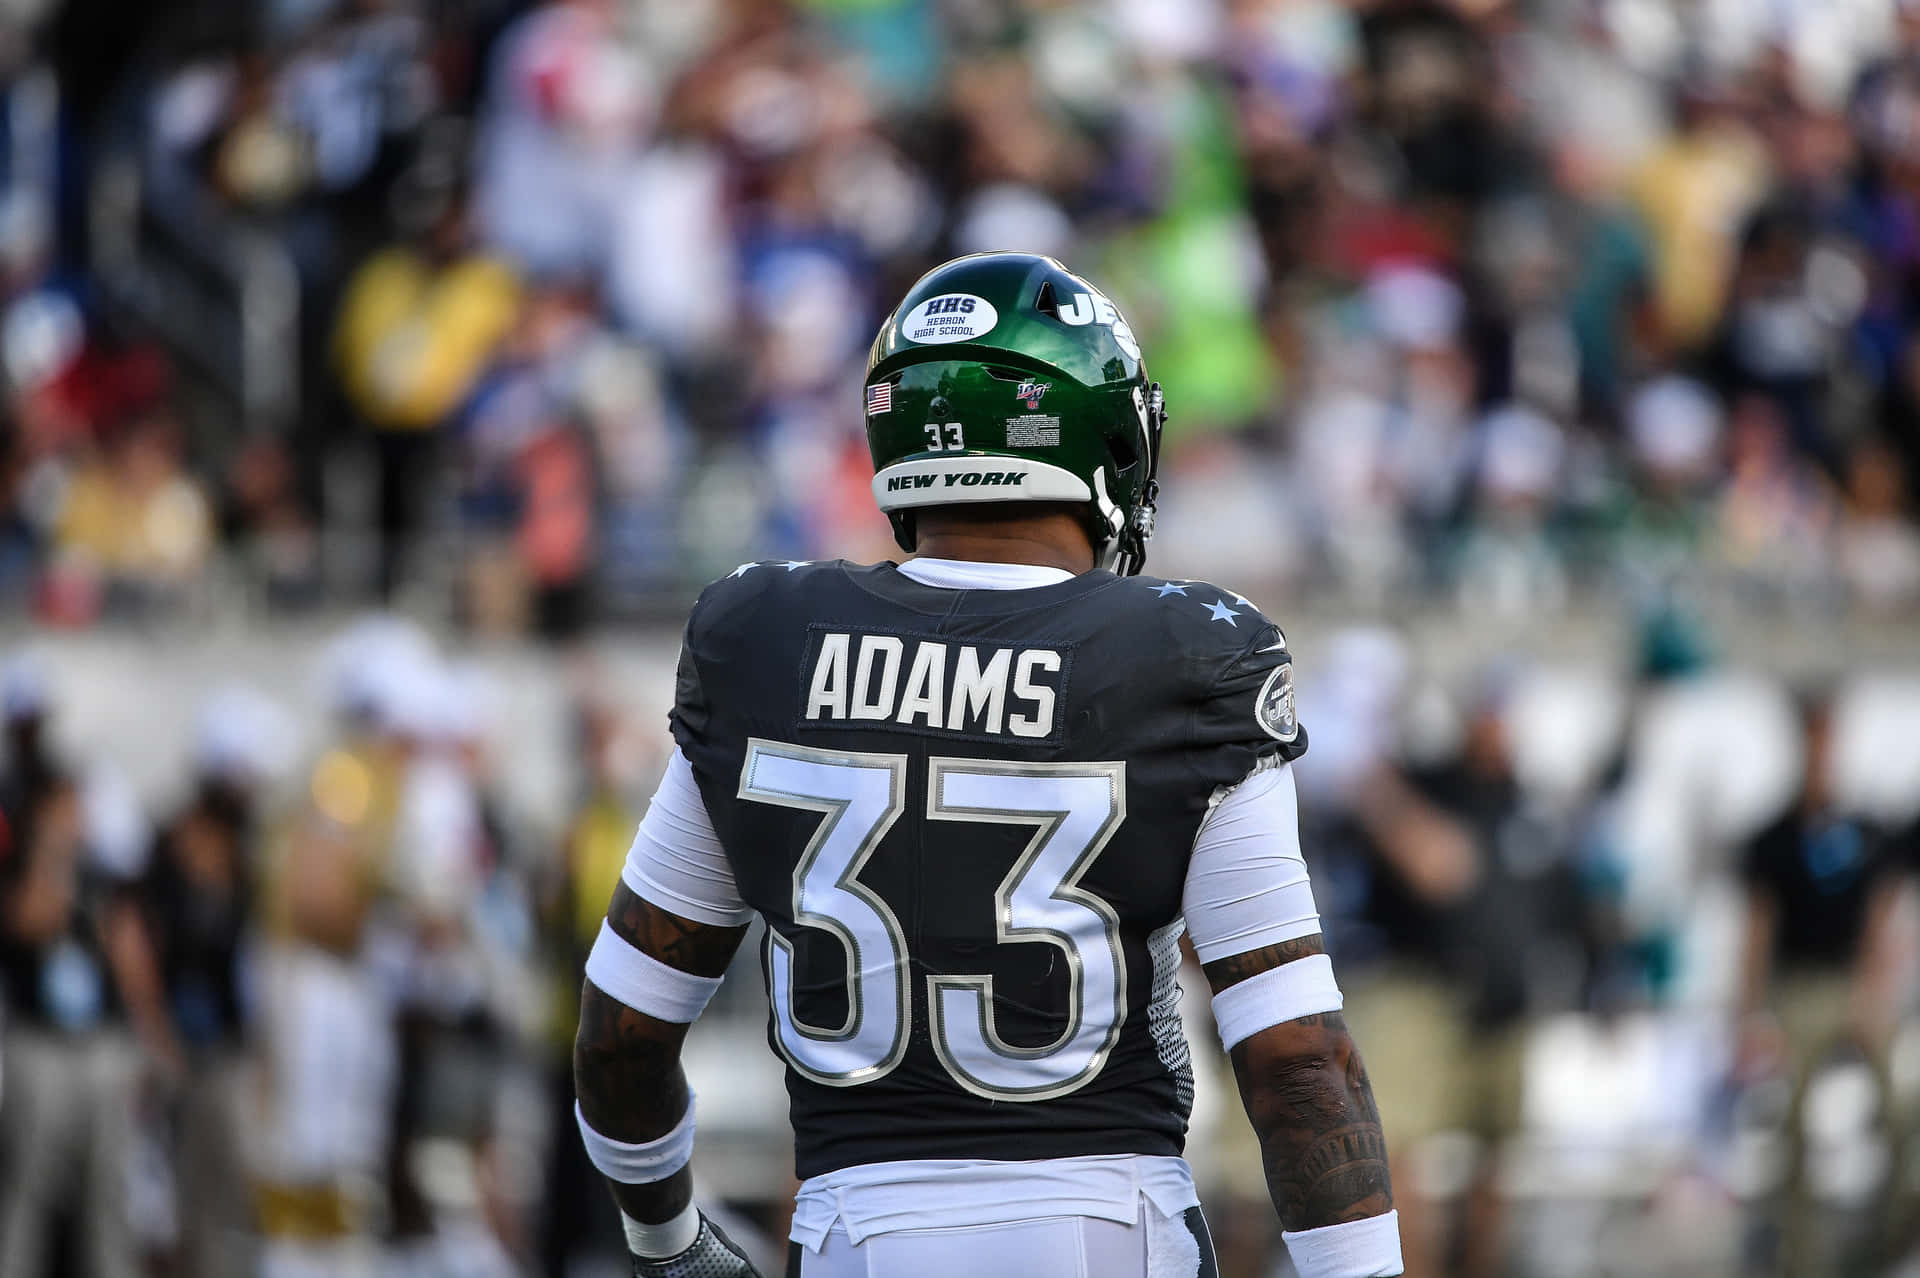 Jamal Adams in action at the 2020 NFL Pro Bowl Wallpaper